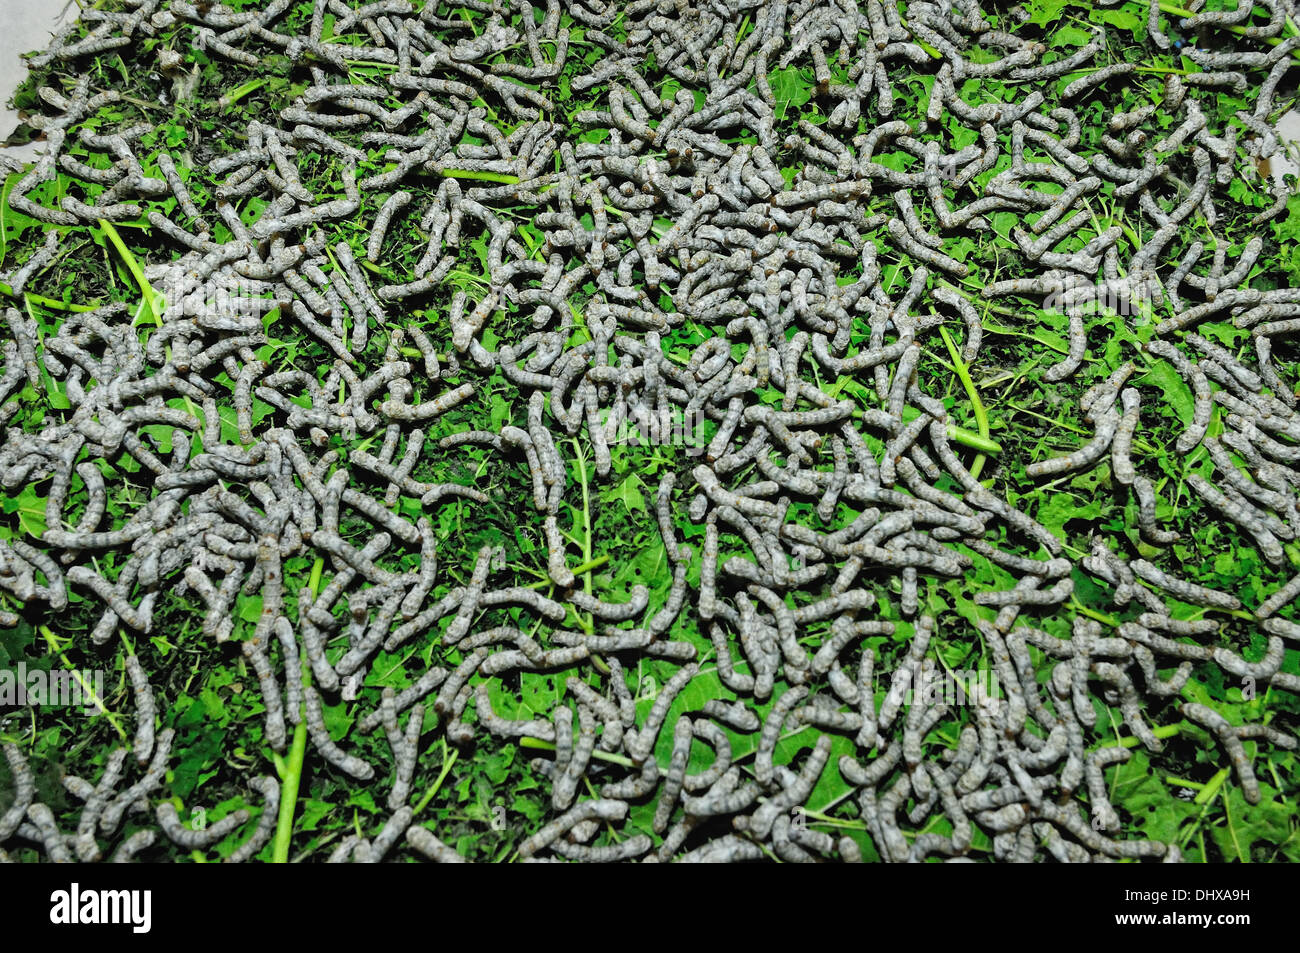 Silkworms on mulberry leaves Stock Photo